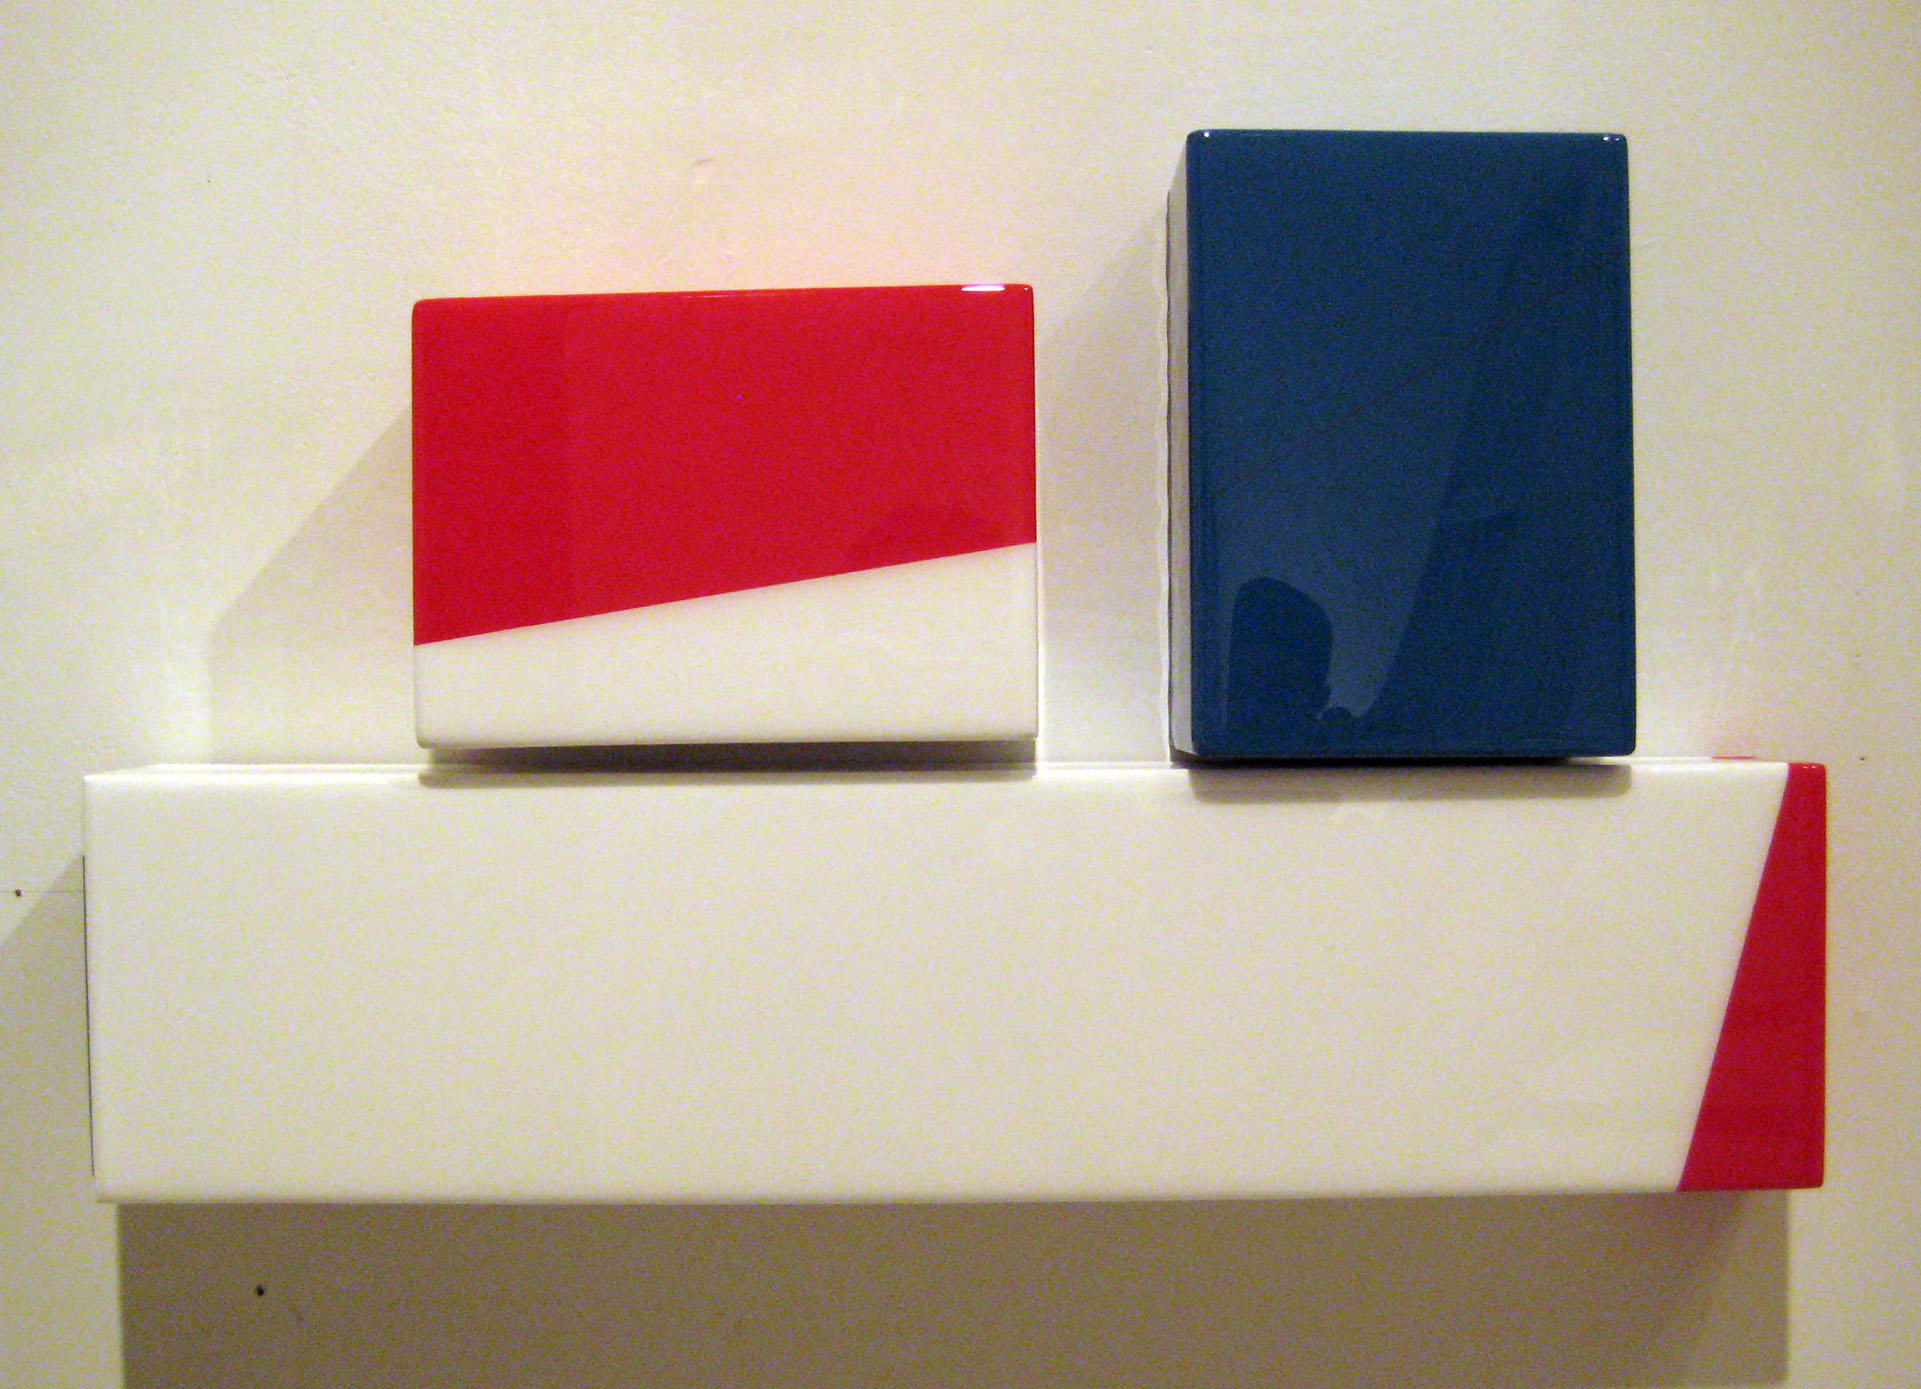   Puzzle #2, In honour of France  –  Acrylic, MDF, UV resin 12” x 24” x 3” / 30 x 61 x 8 cm 